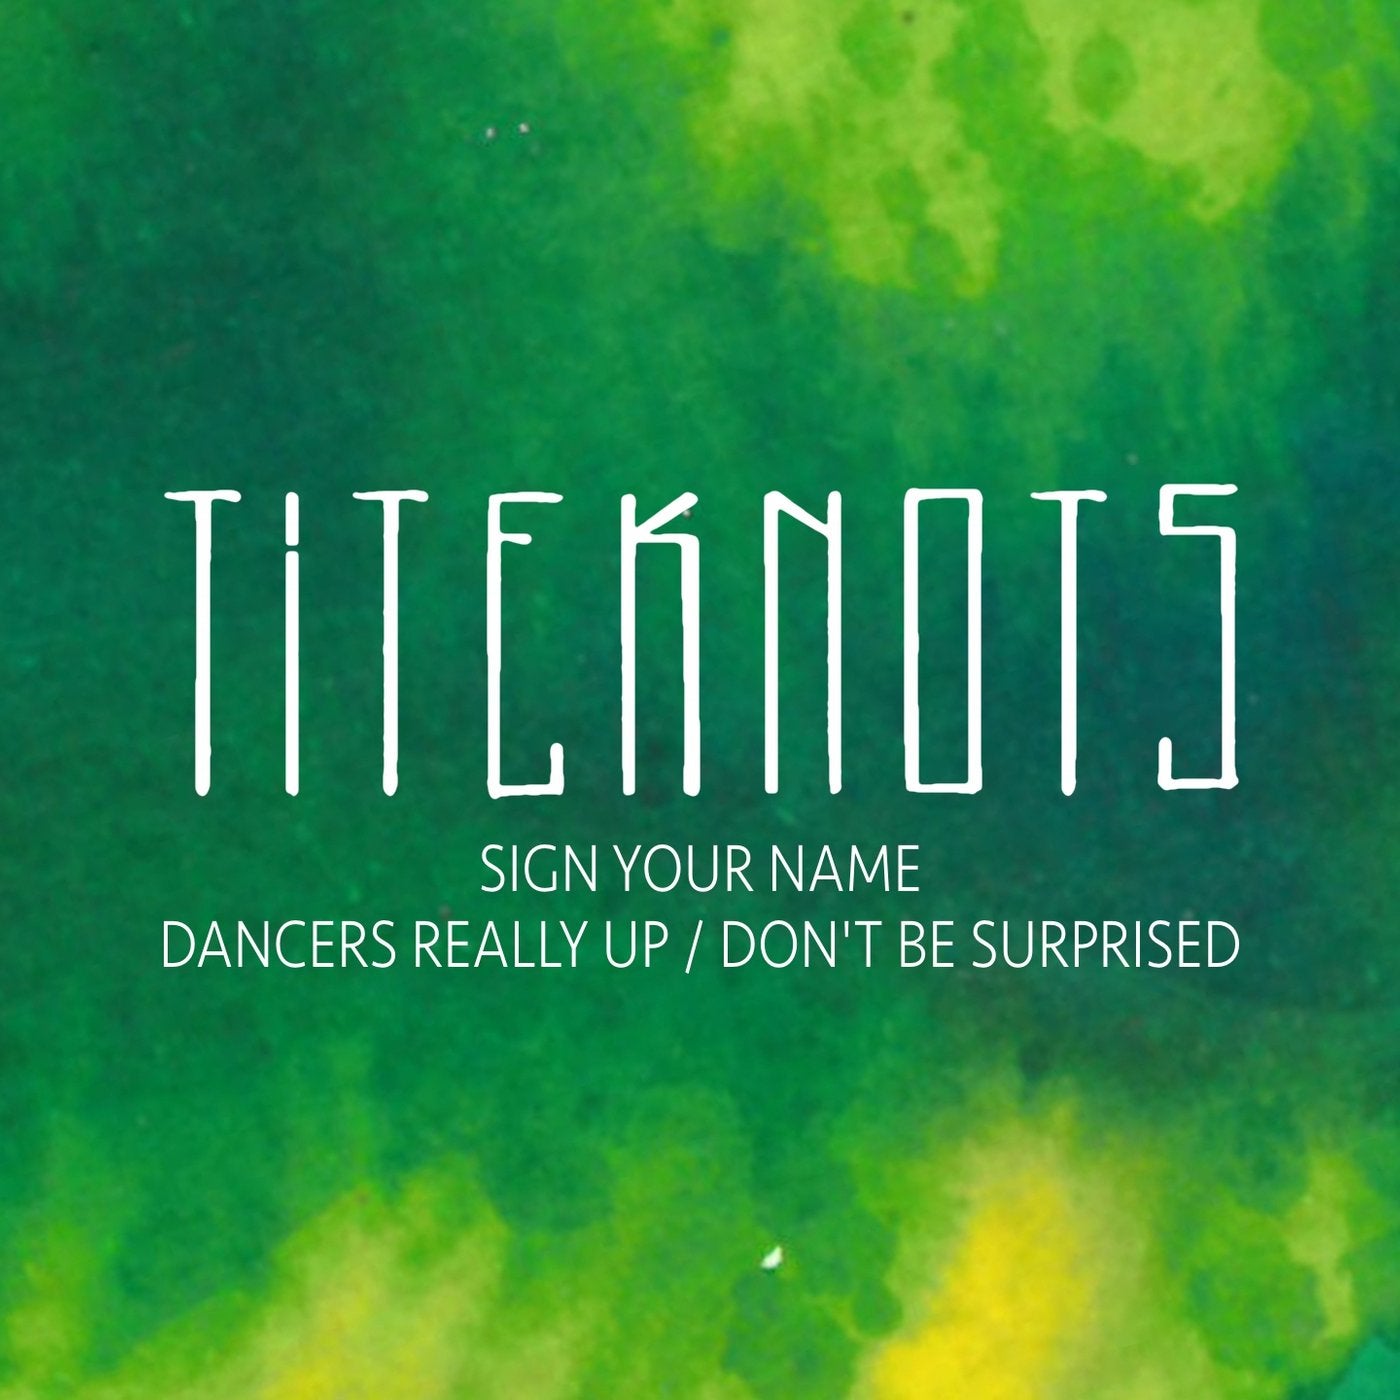 Sign Your Name /  Dancers Really Up / Don't Be Surprised